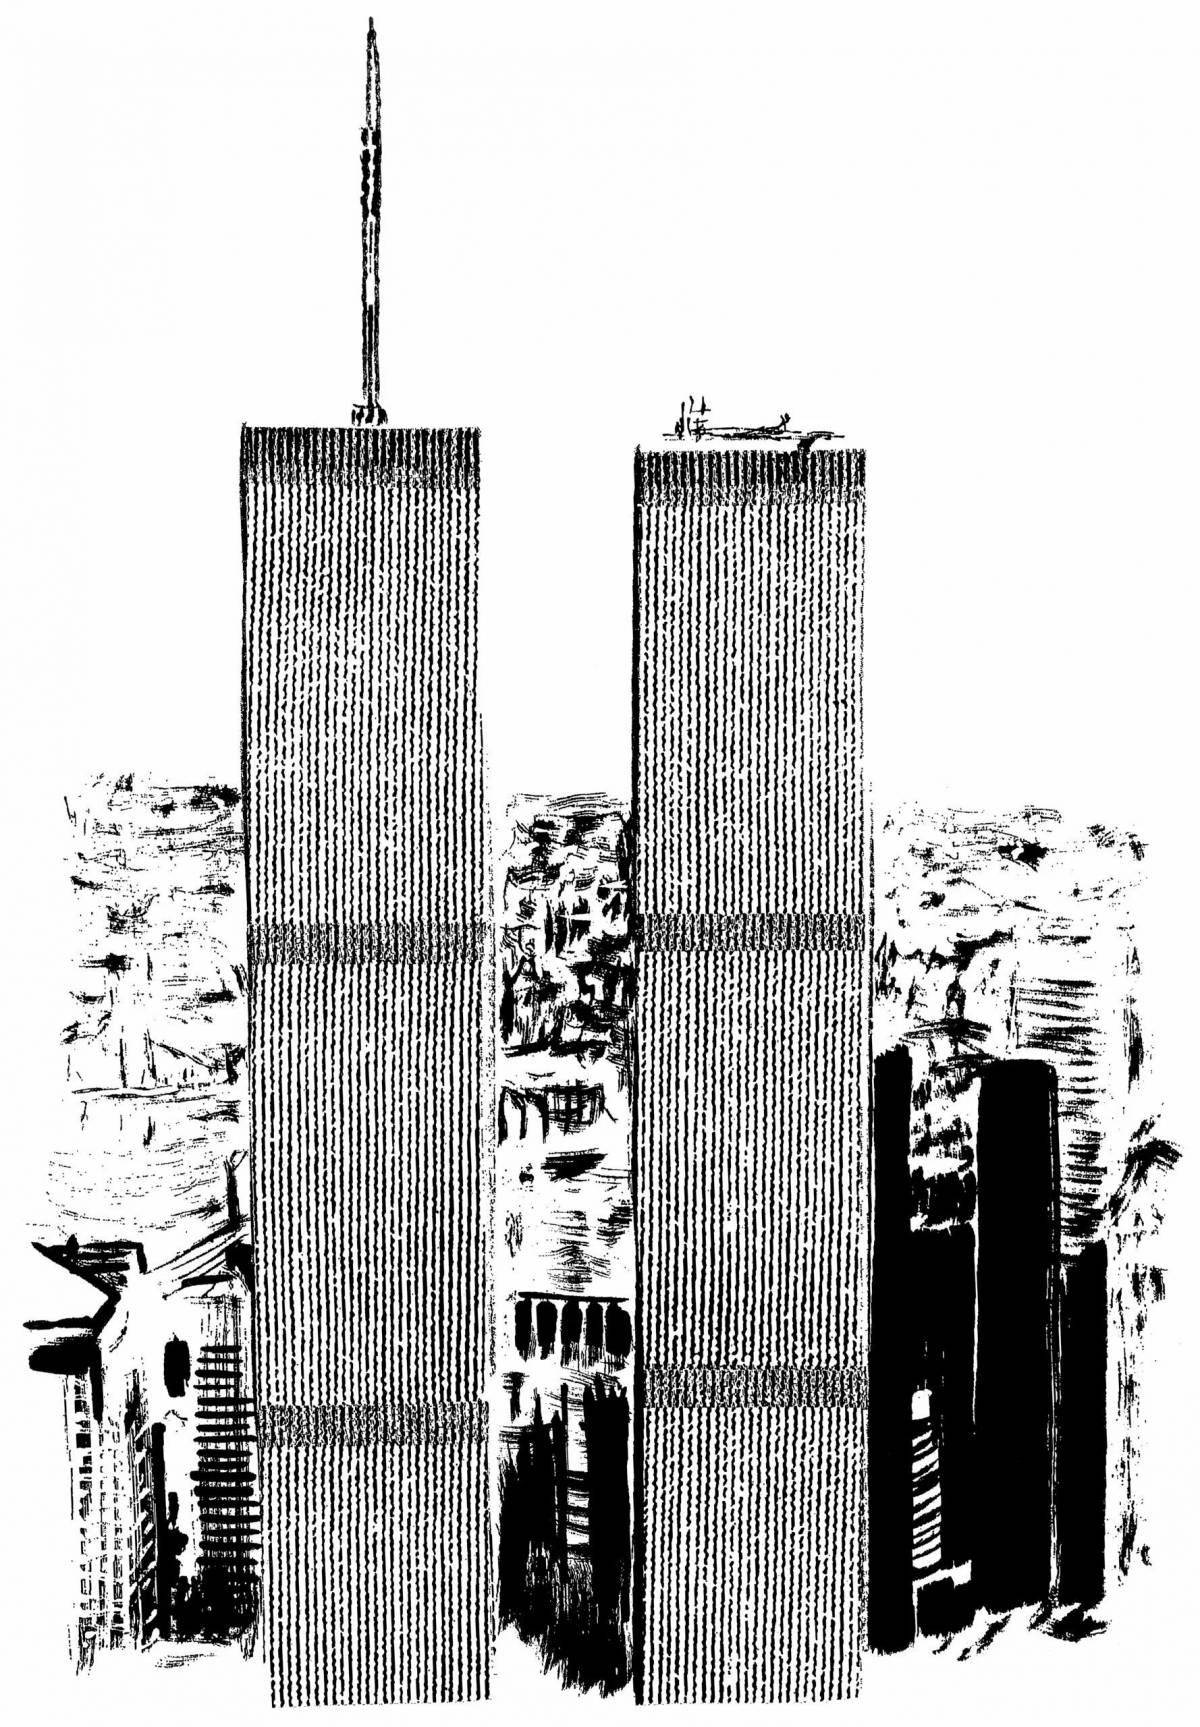 Exquisite twin towers coloring book